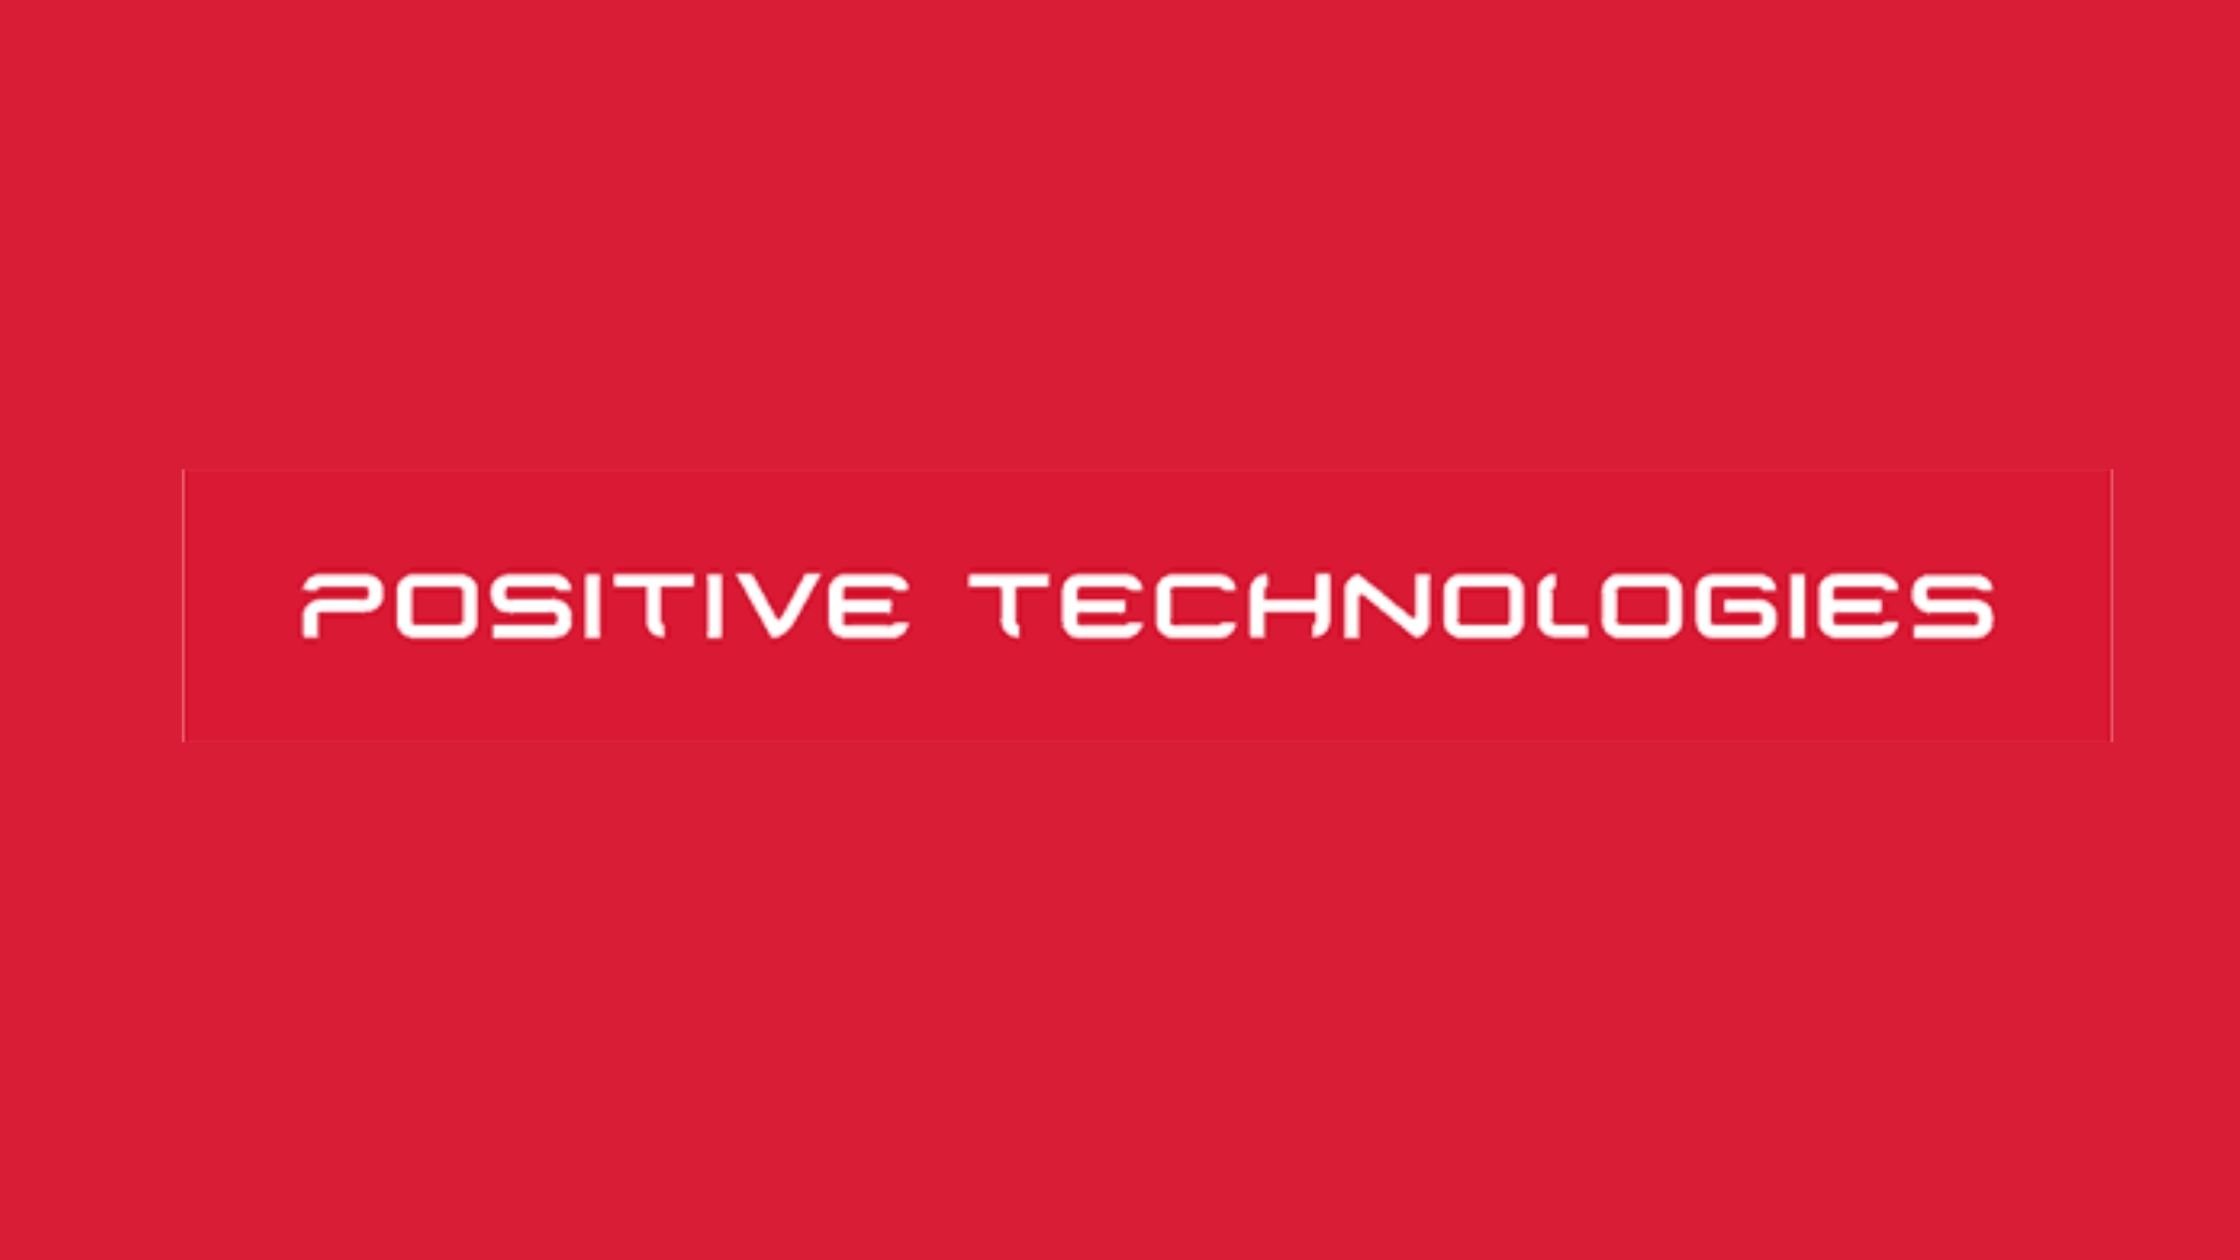 Positive Technologies company logo on red background